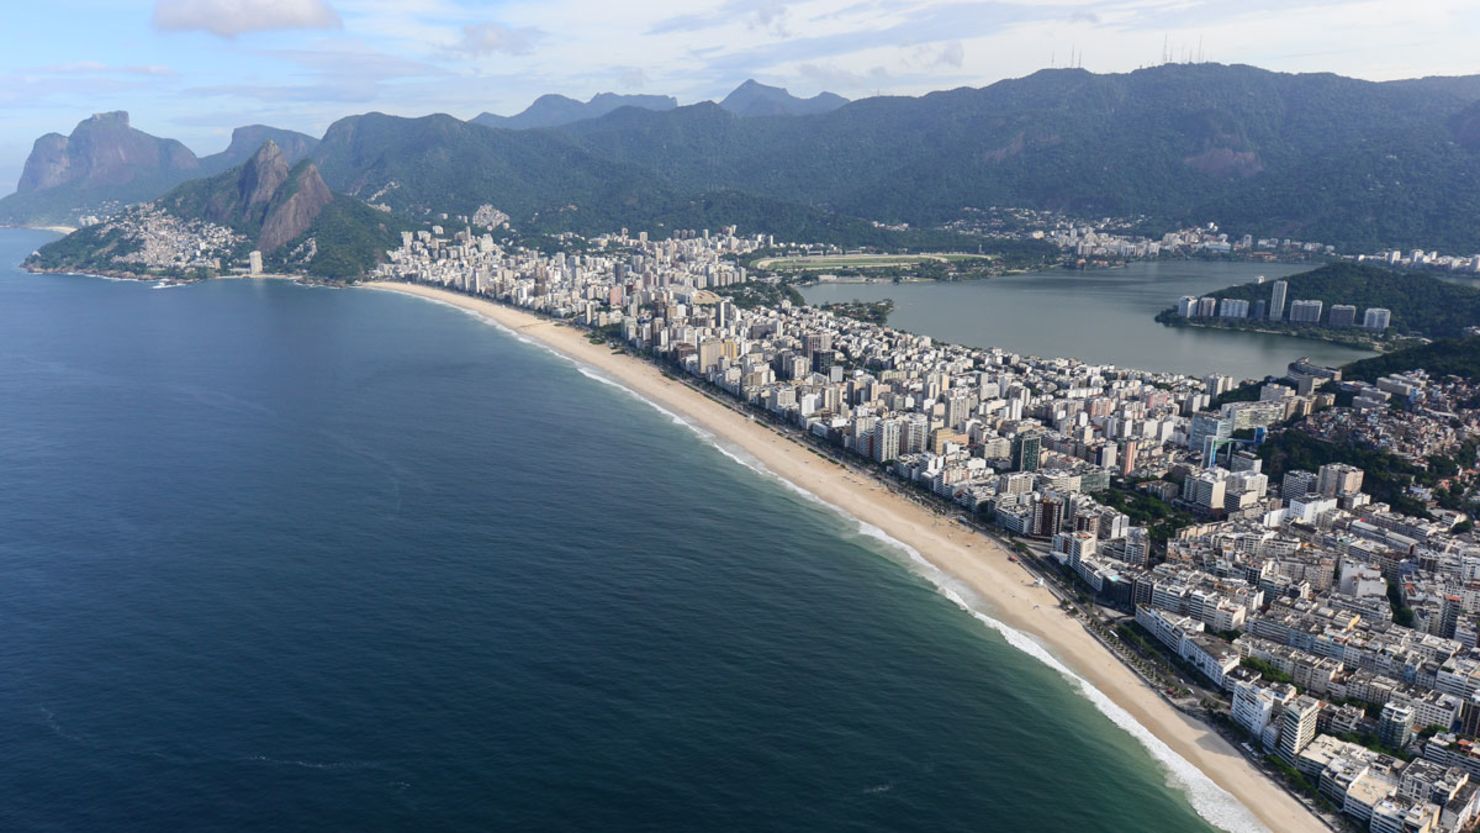 Ipanema beach in Rio de Janeiro. World Cup crowds will come for more than just the football.